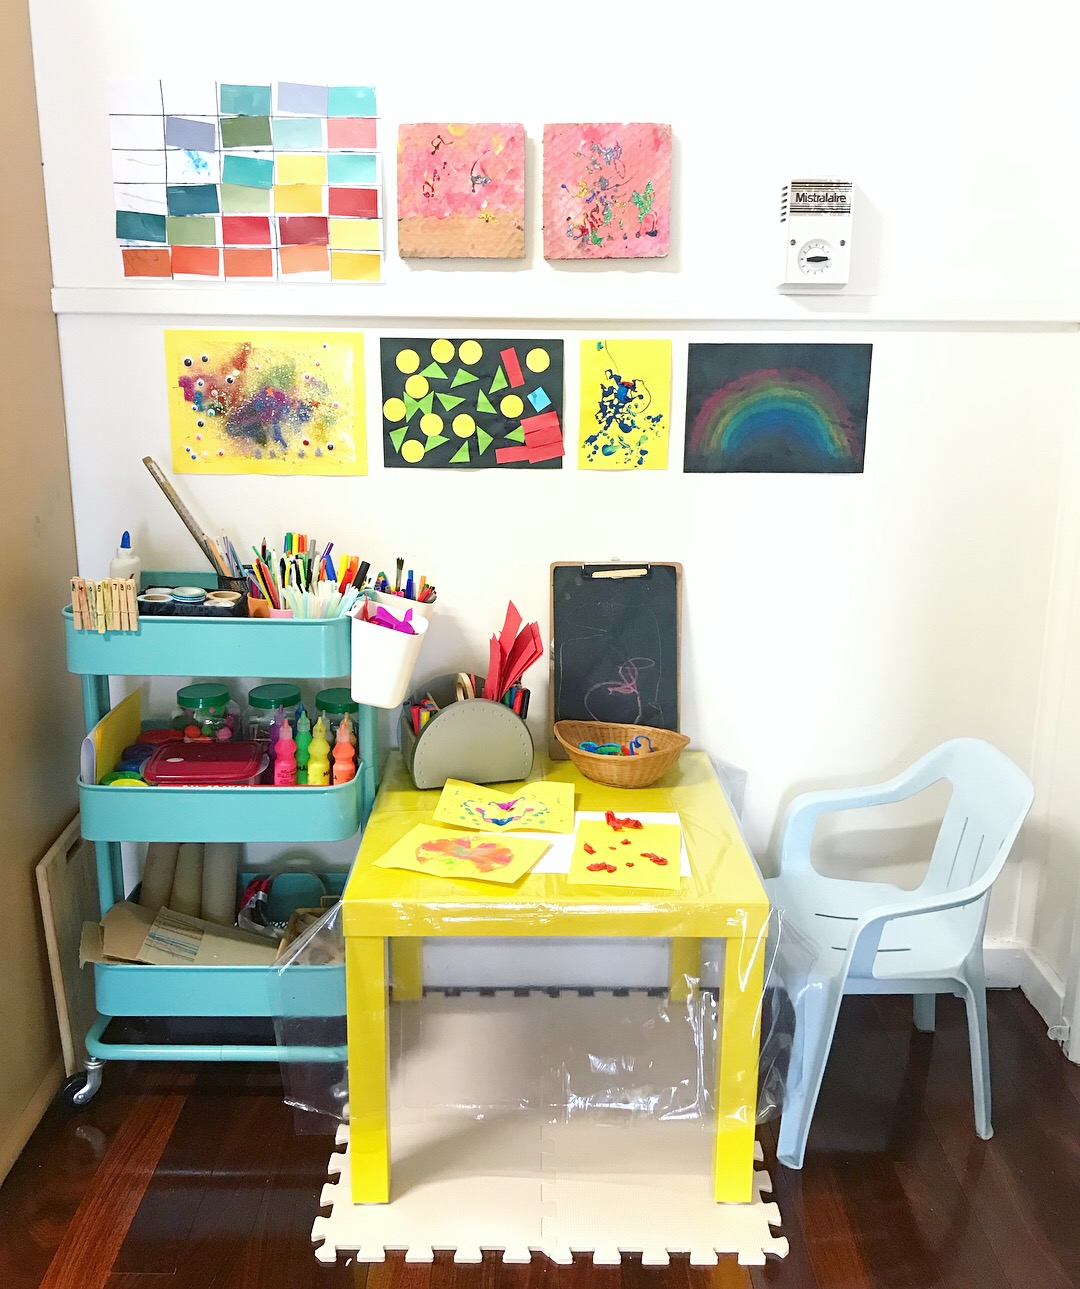 How To Make A Portable Art Box - The Art Pantry